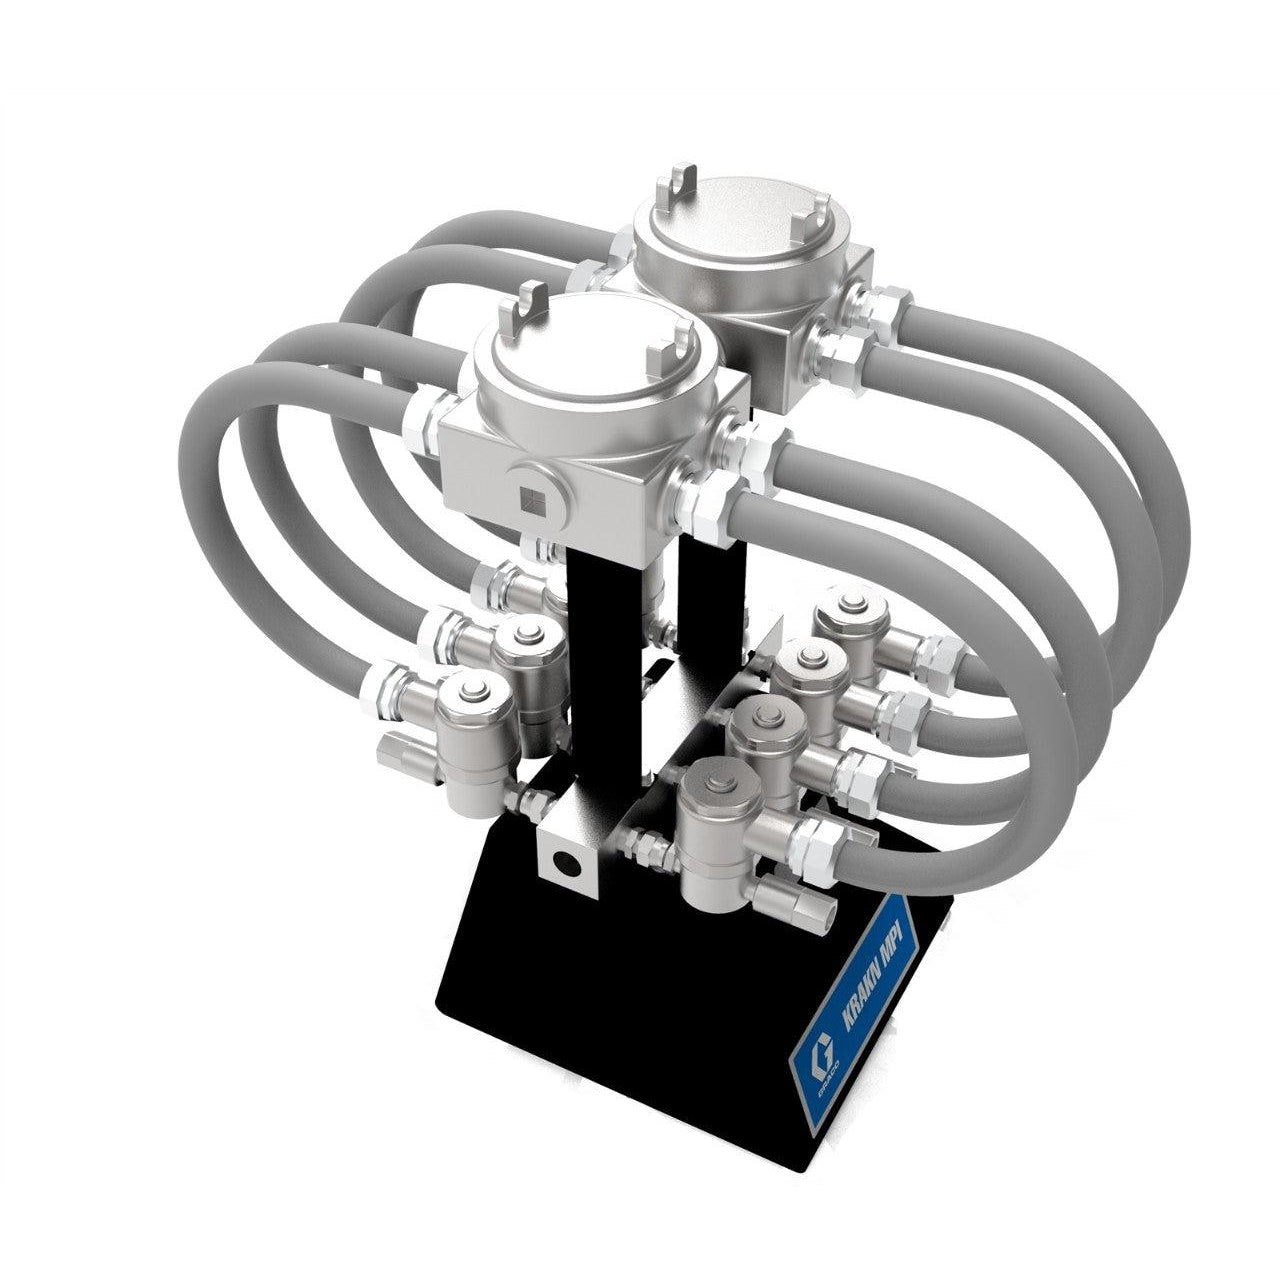 5 valve KRAKN MPI fluid manifold assembly, Class 1, Division 1 approved for Hazardous Locations